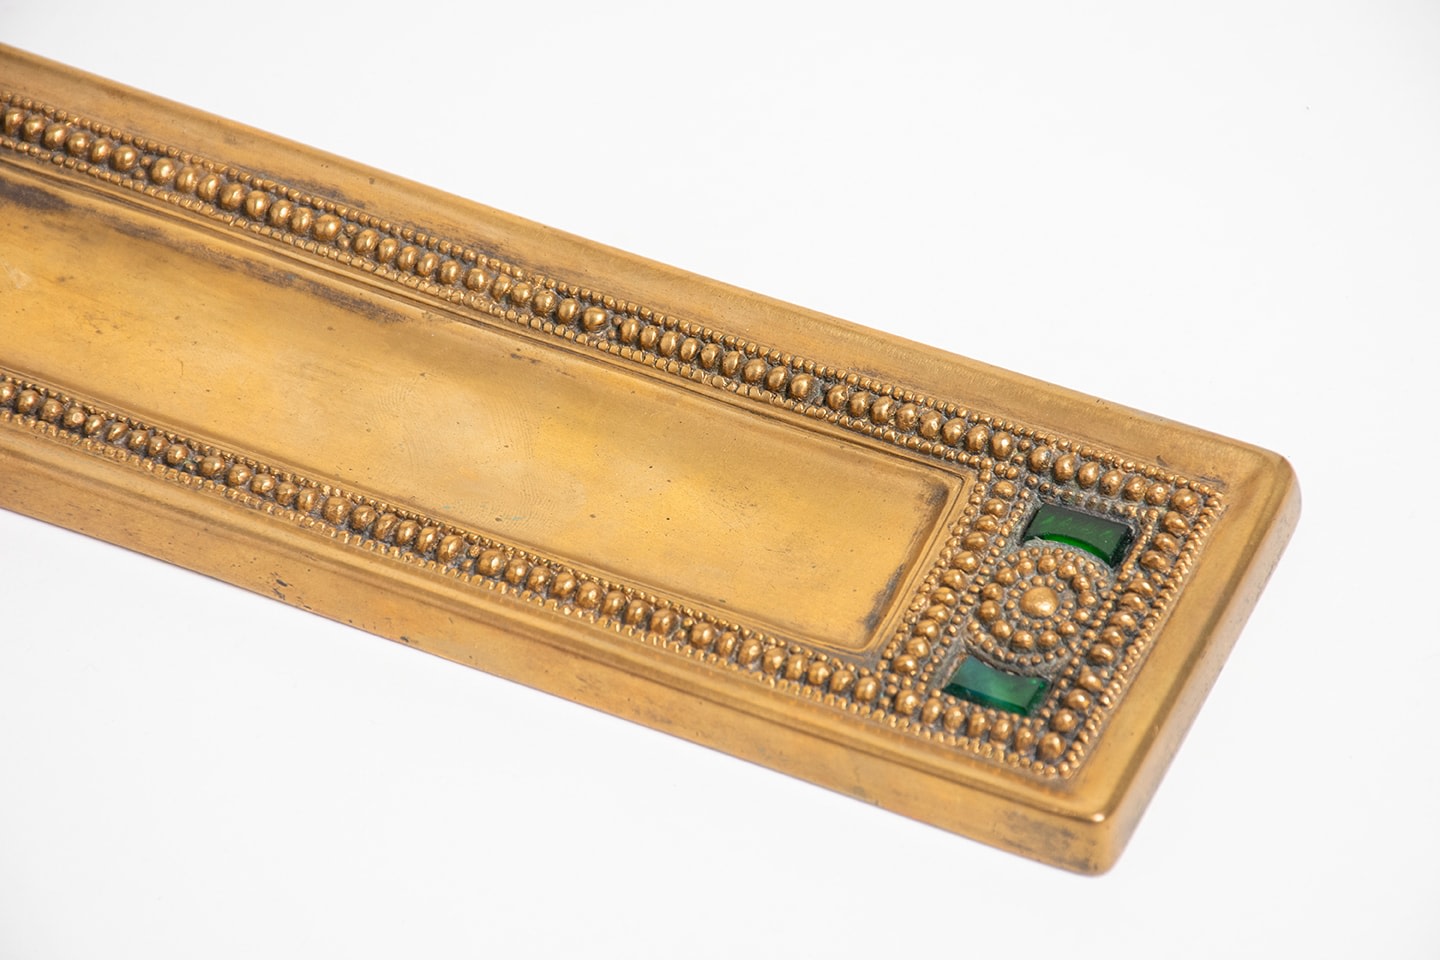 a gilt bronze tiffany studios pen tray from the byzantine pattern desk set, a rectangular piece with a central well for the pen, framed by a border of beadwork with inset pieces of tiffany favrile glass in a shade of emerald green